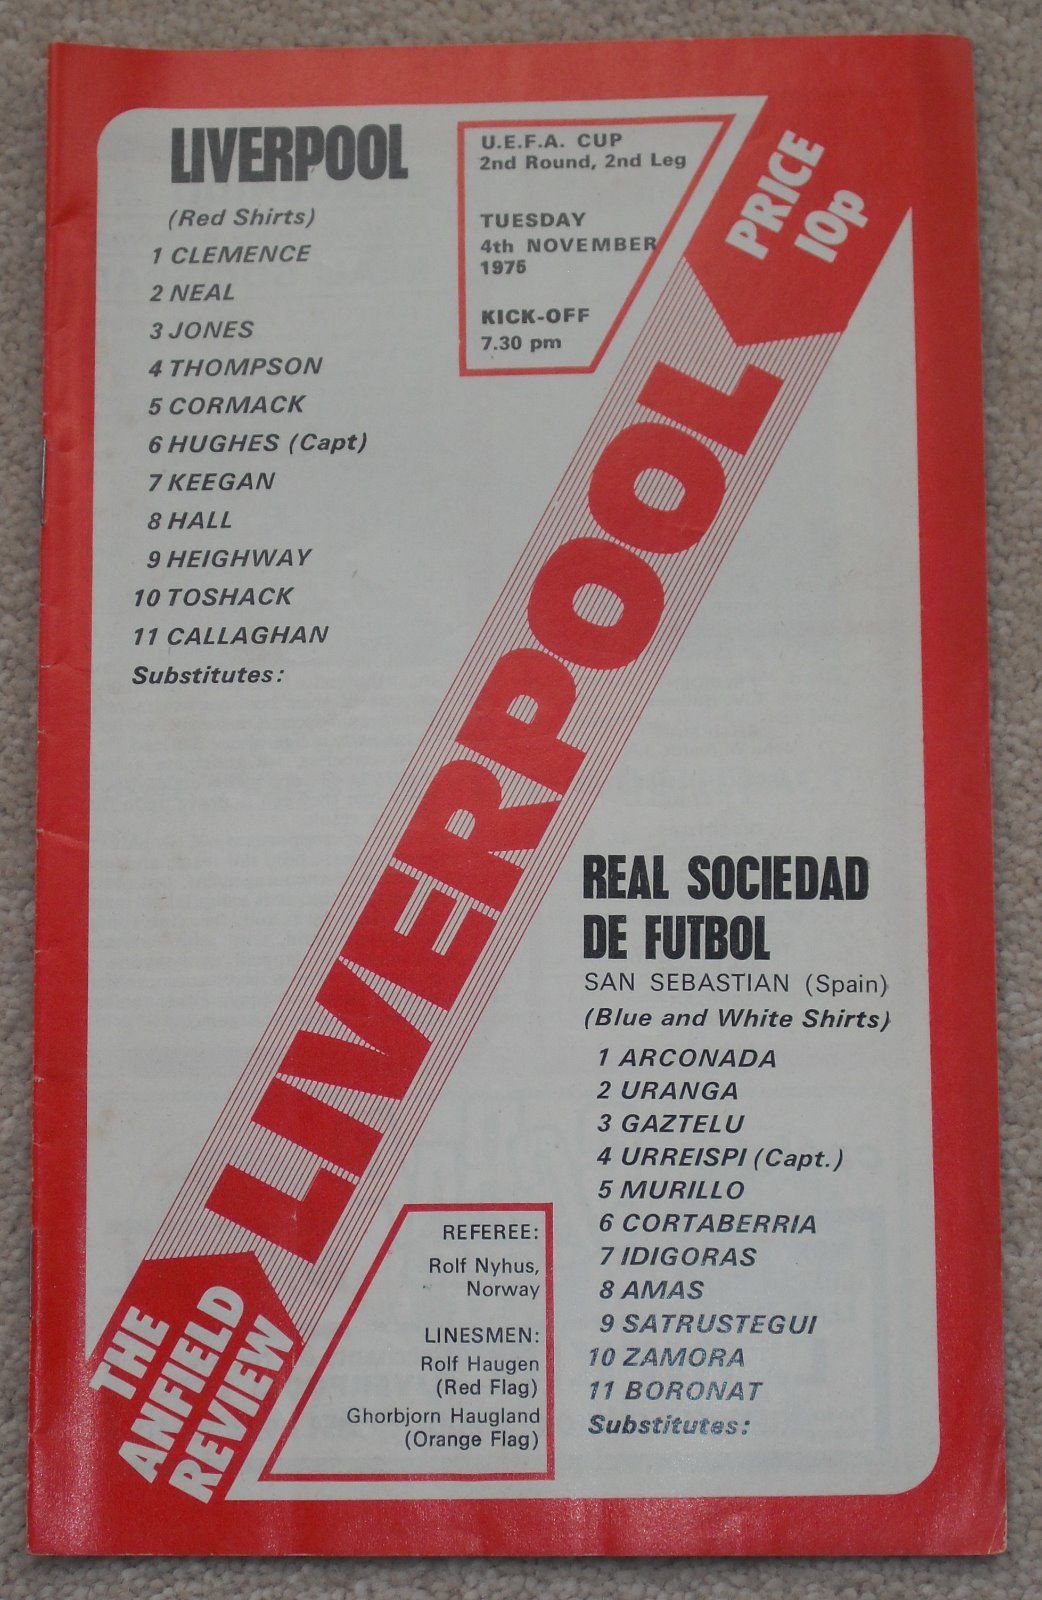 Liverpool FC- Real Sociedad - Anfield - Programme